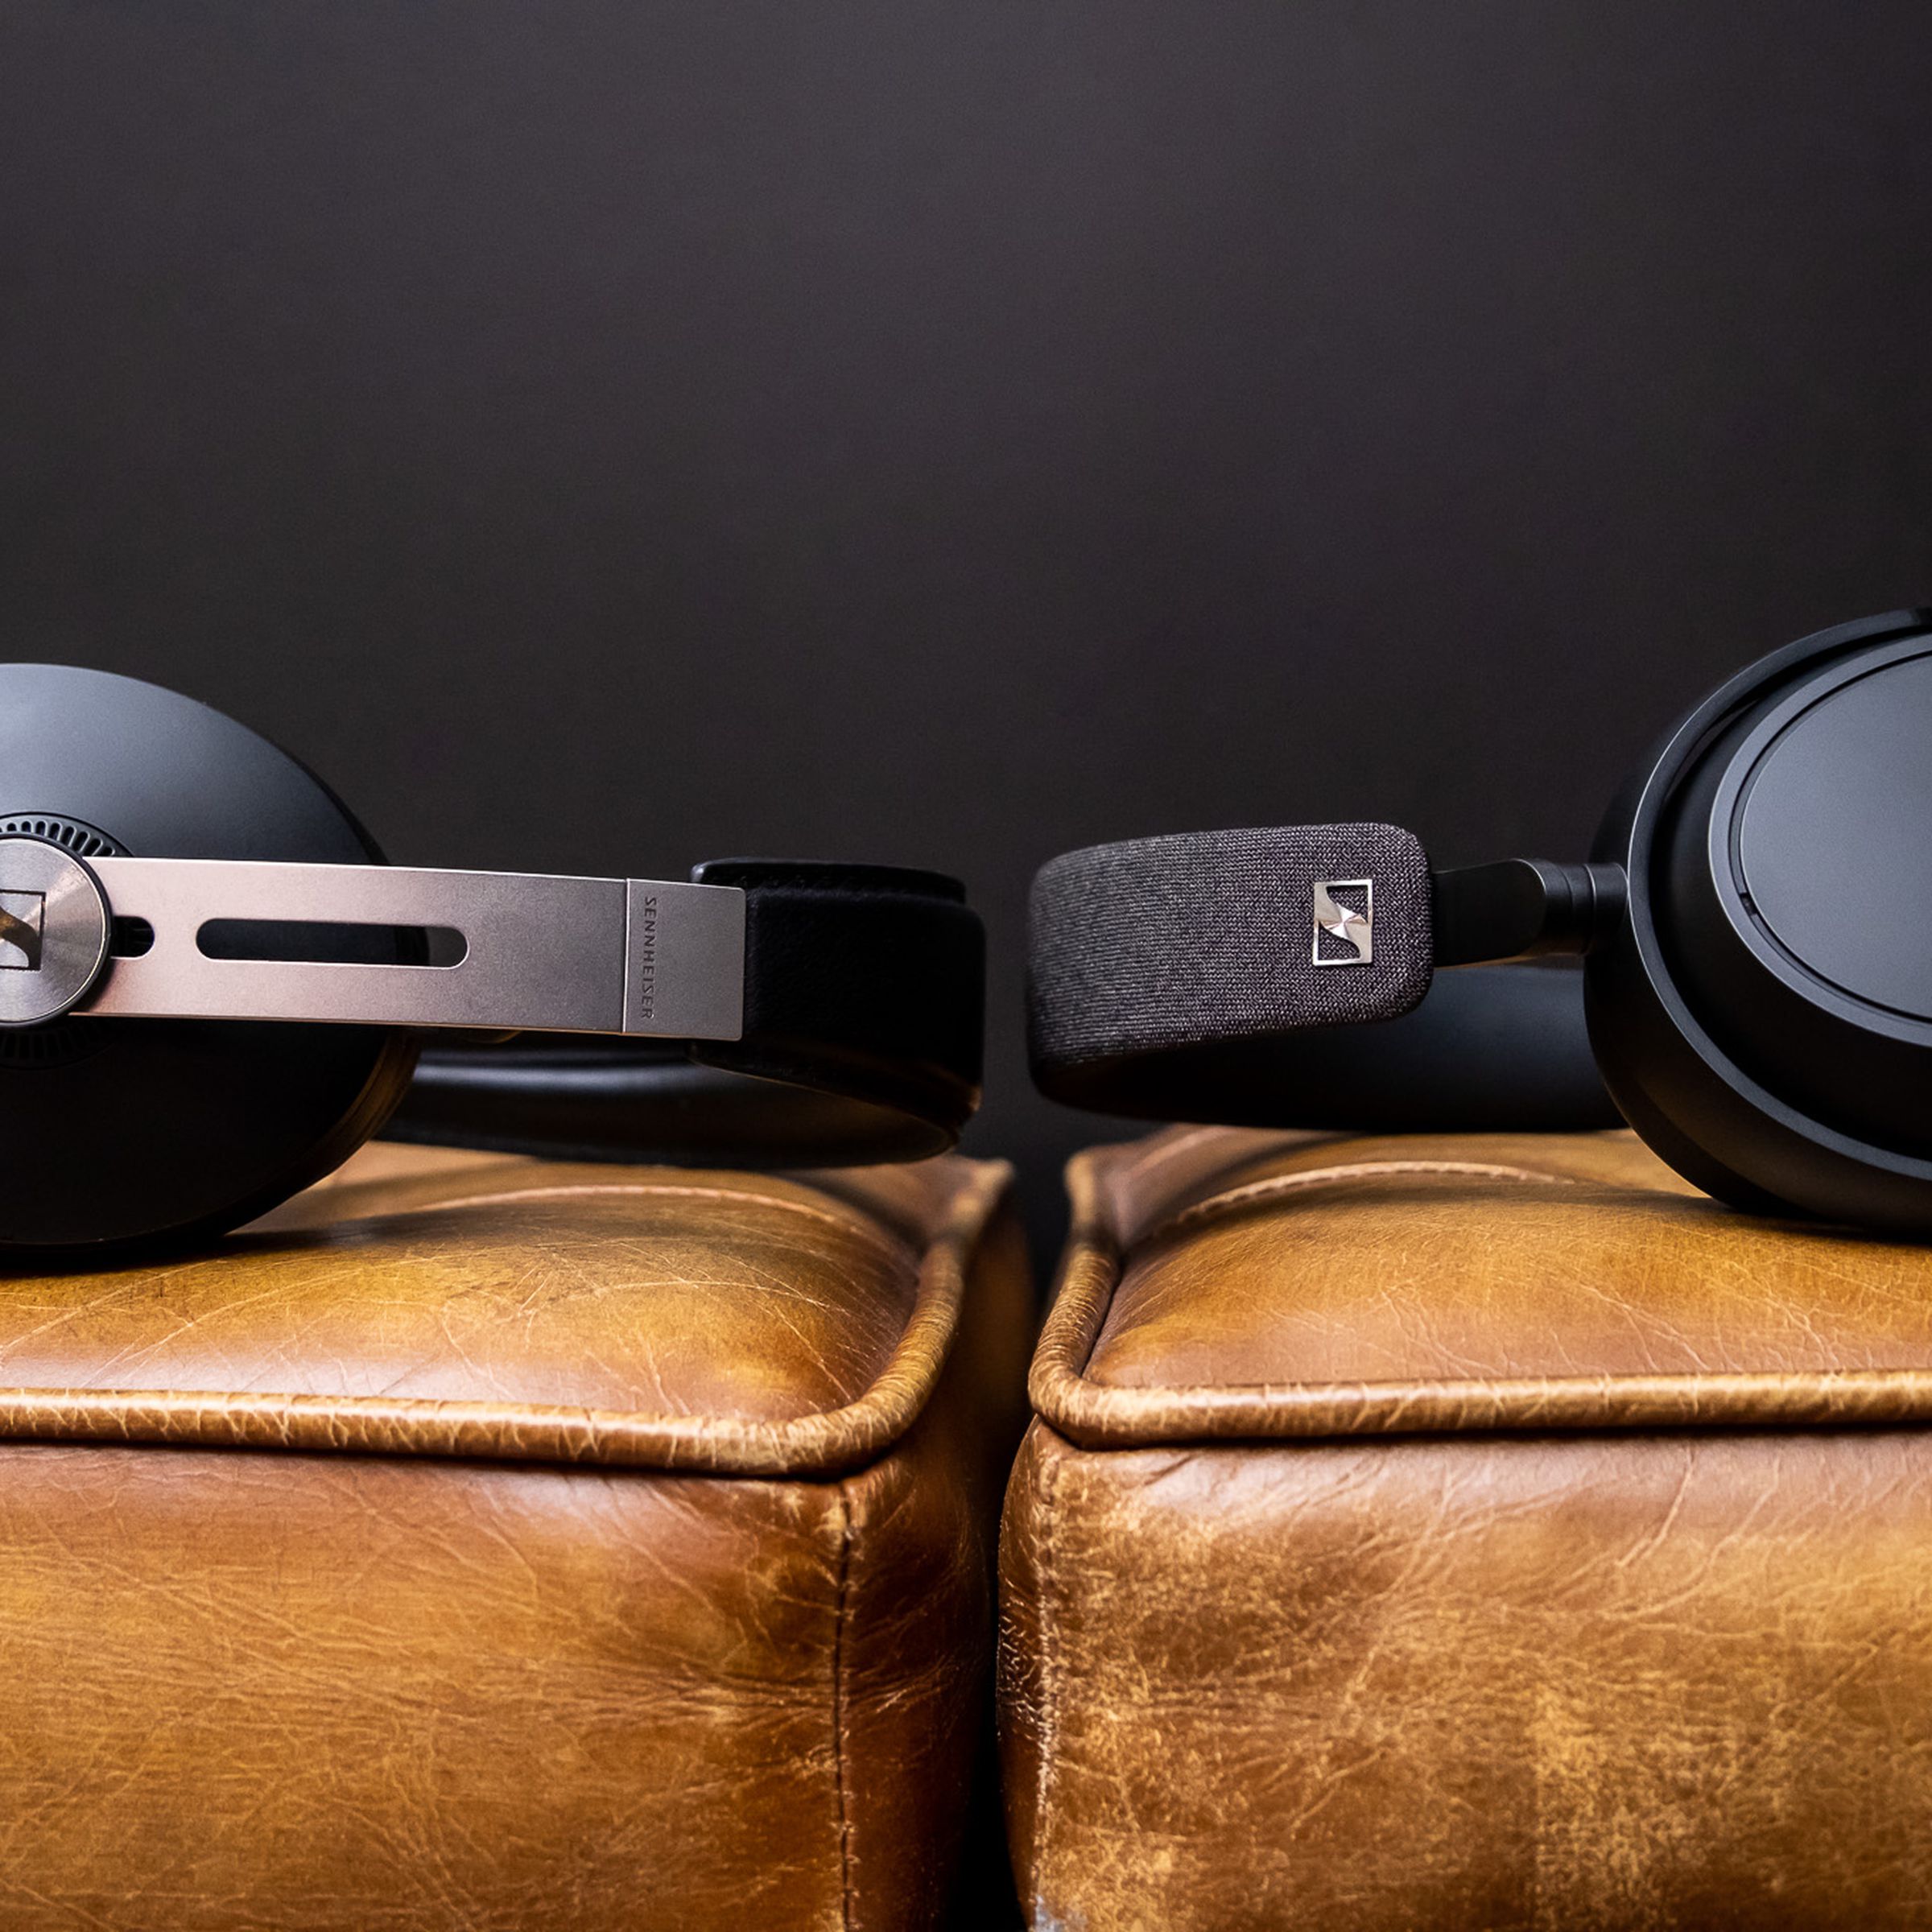 The Sennheiser Momentum 3 and Sennheiser Momentum 4 headphones facing each other while lying on a couch.